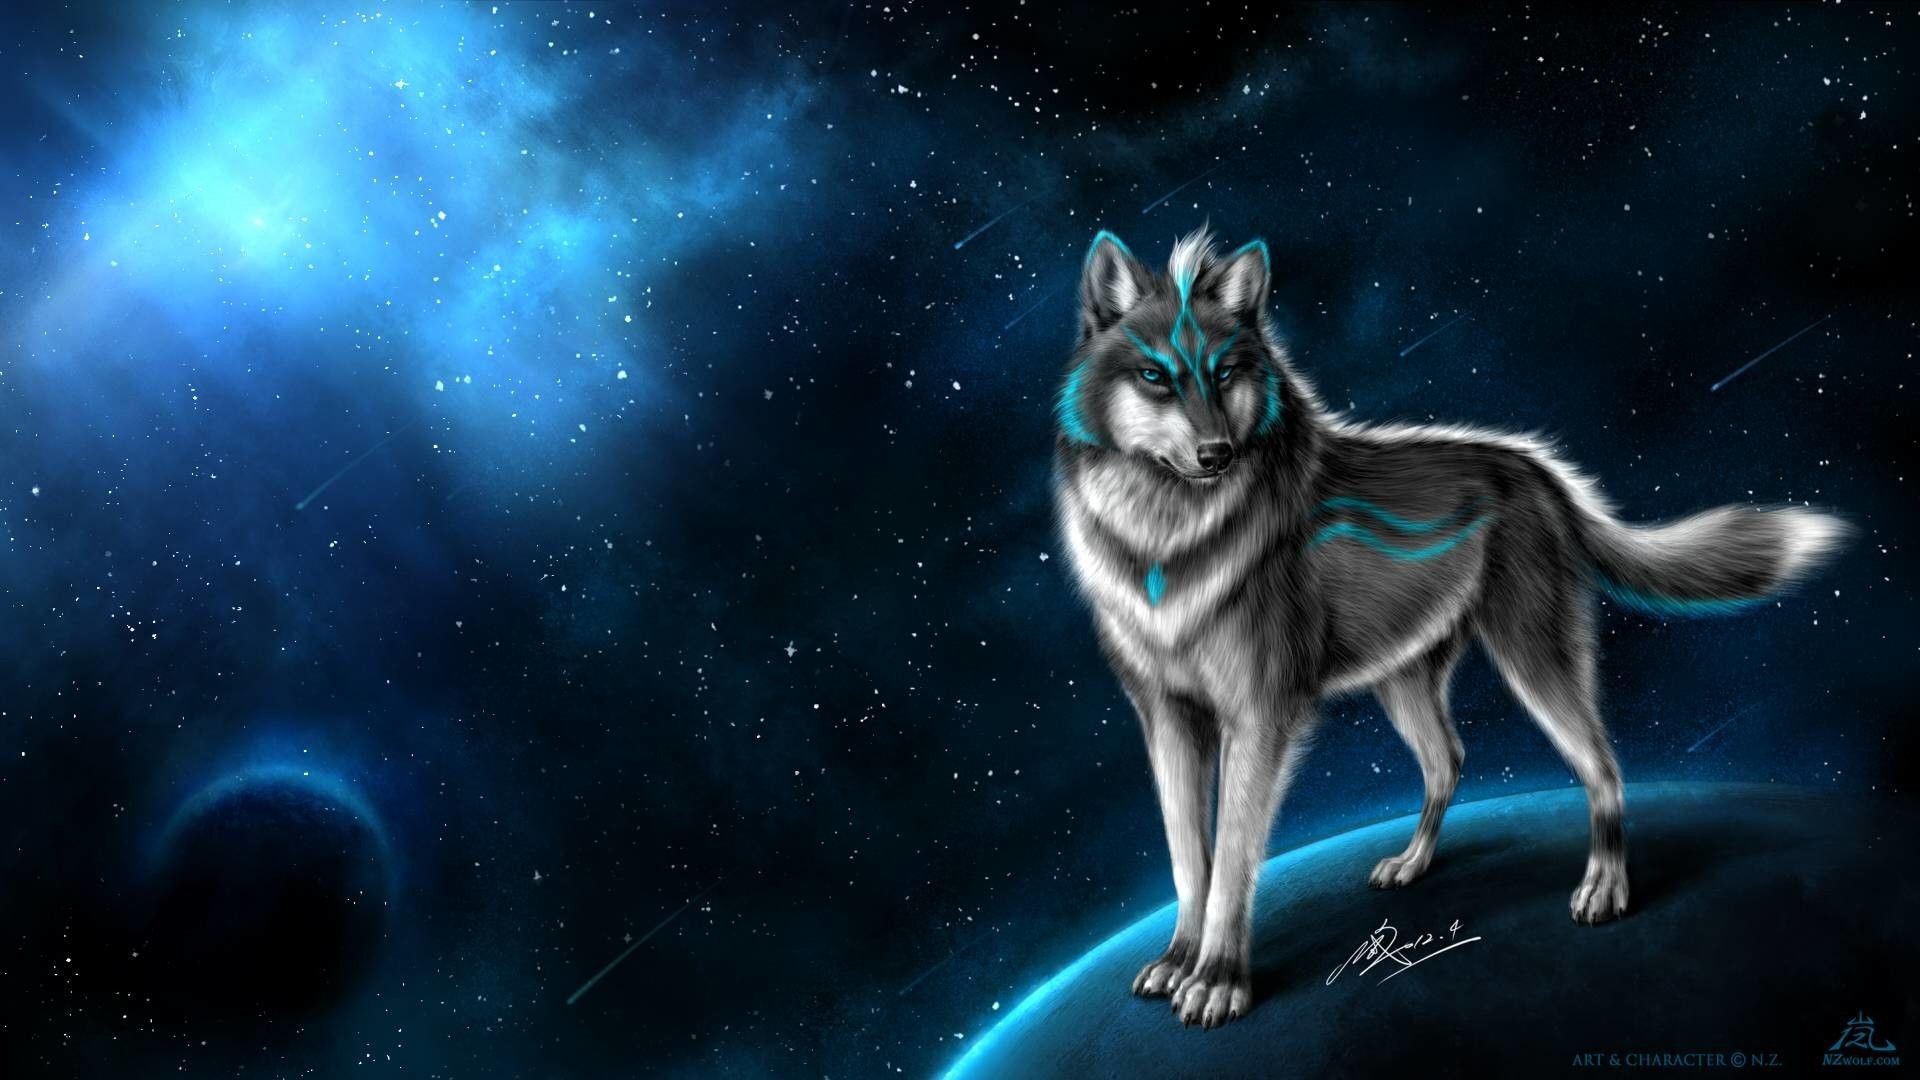 1920x1080  Anime Wolf Wallpaper (35+ images) on Genchi.info">